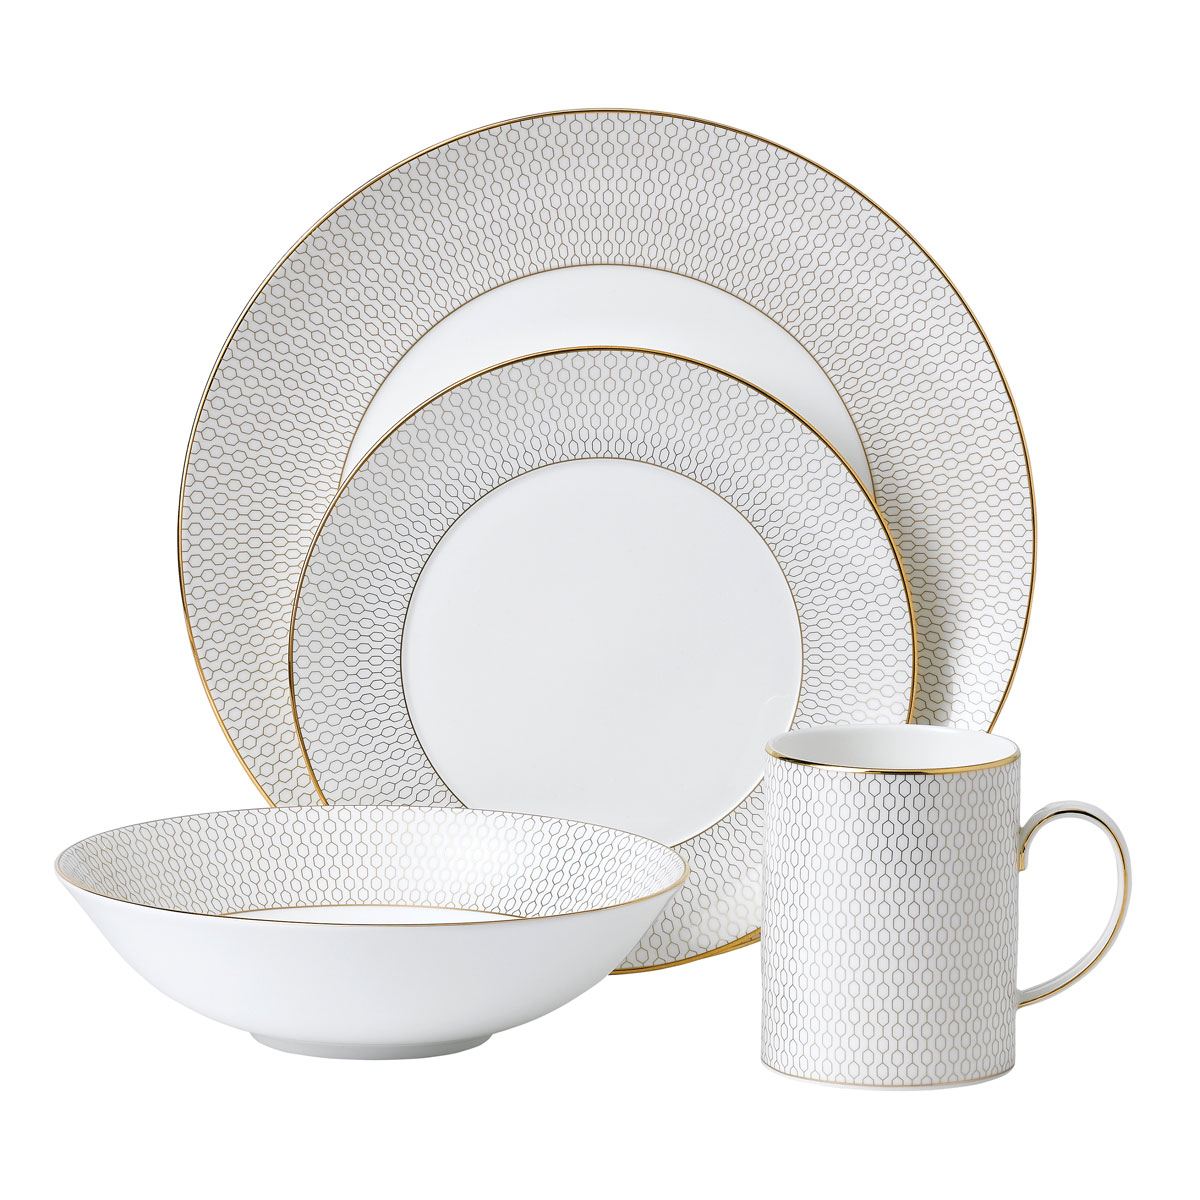 Wedgwood Arris Gio Gold 4 Piece Expressive Place Setting